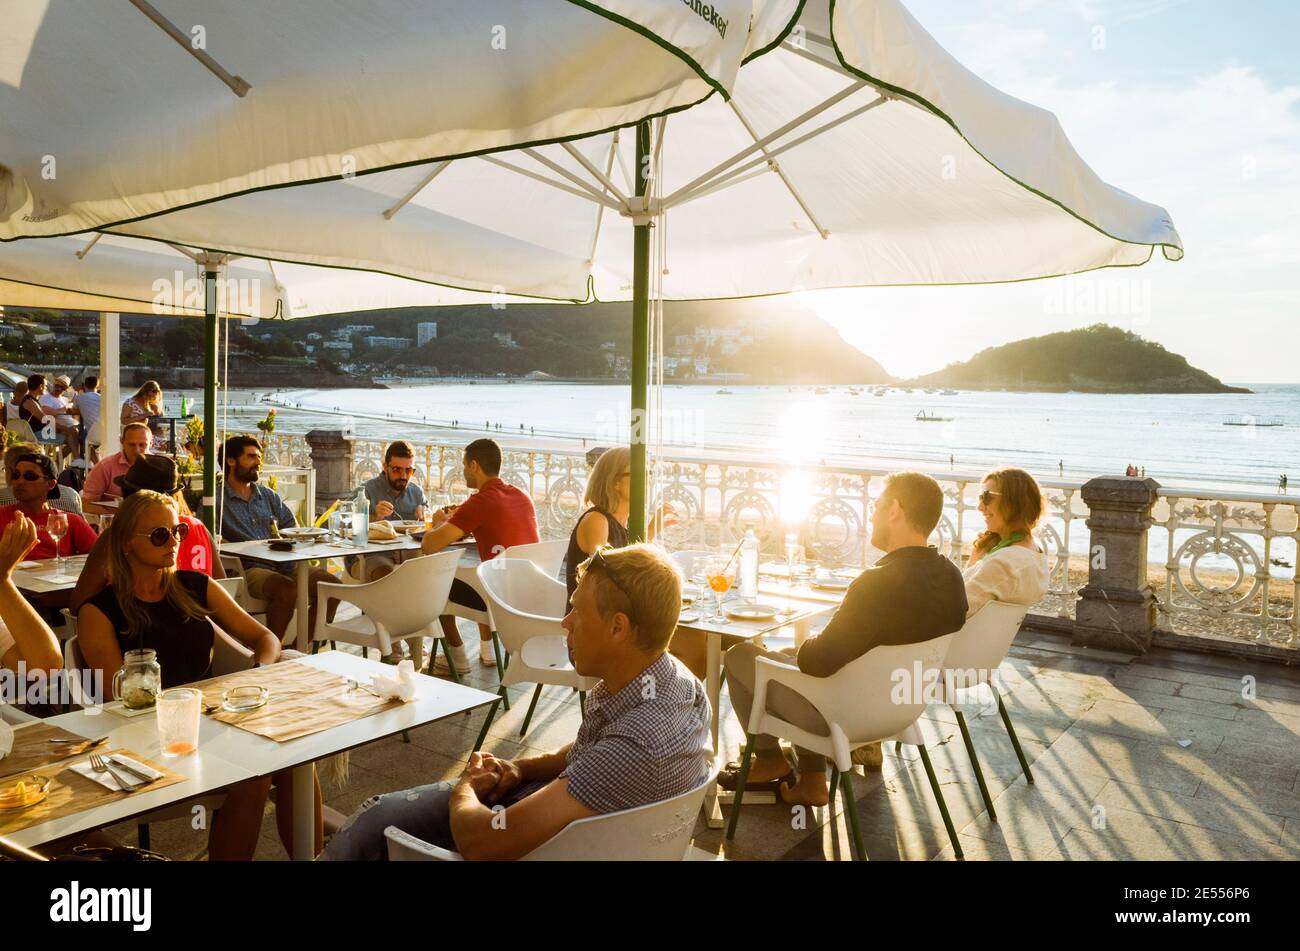 Donostia, Gipuzkoa, Basque Country, Spain - July 15th, 2019 : People relax at sunset in a chic sidewalk cafe in the promenade of La Concha beach. Stock Photo